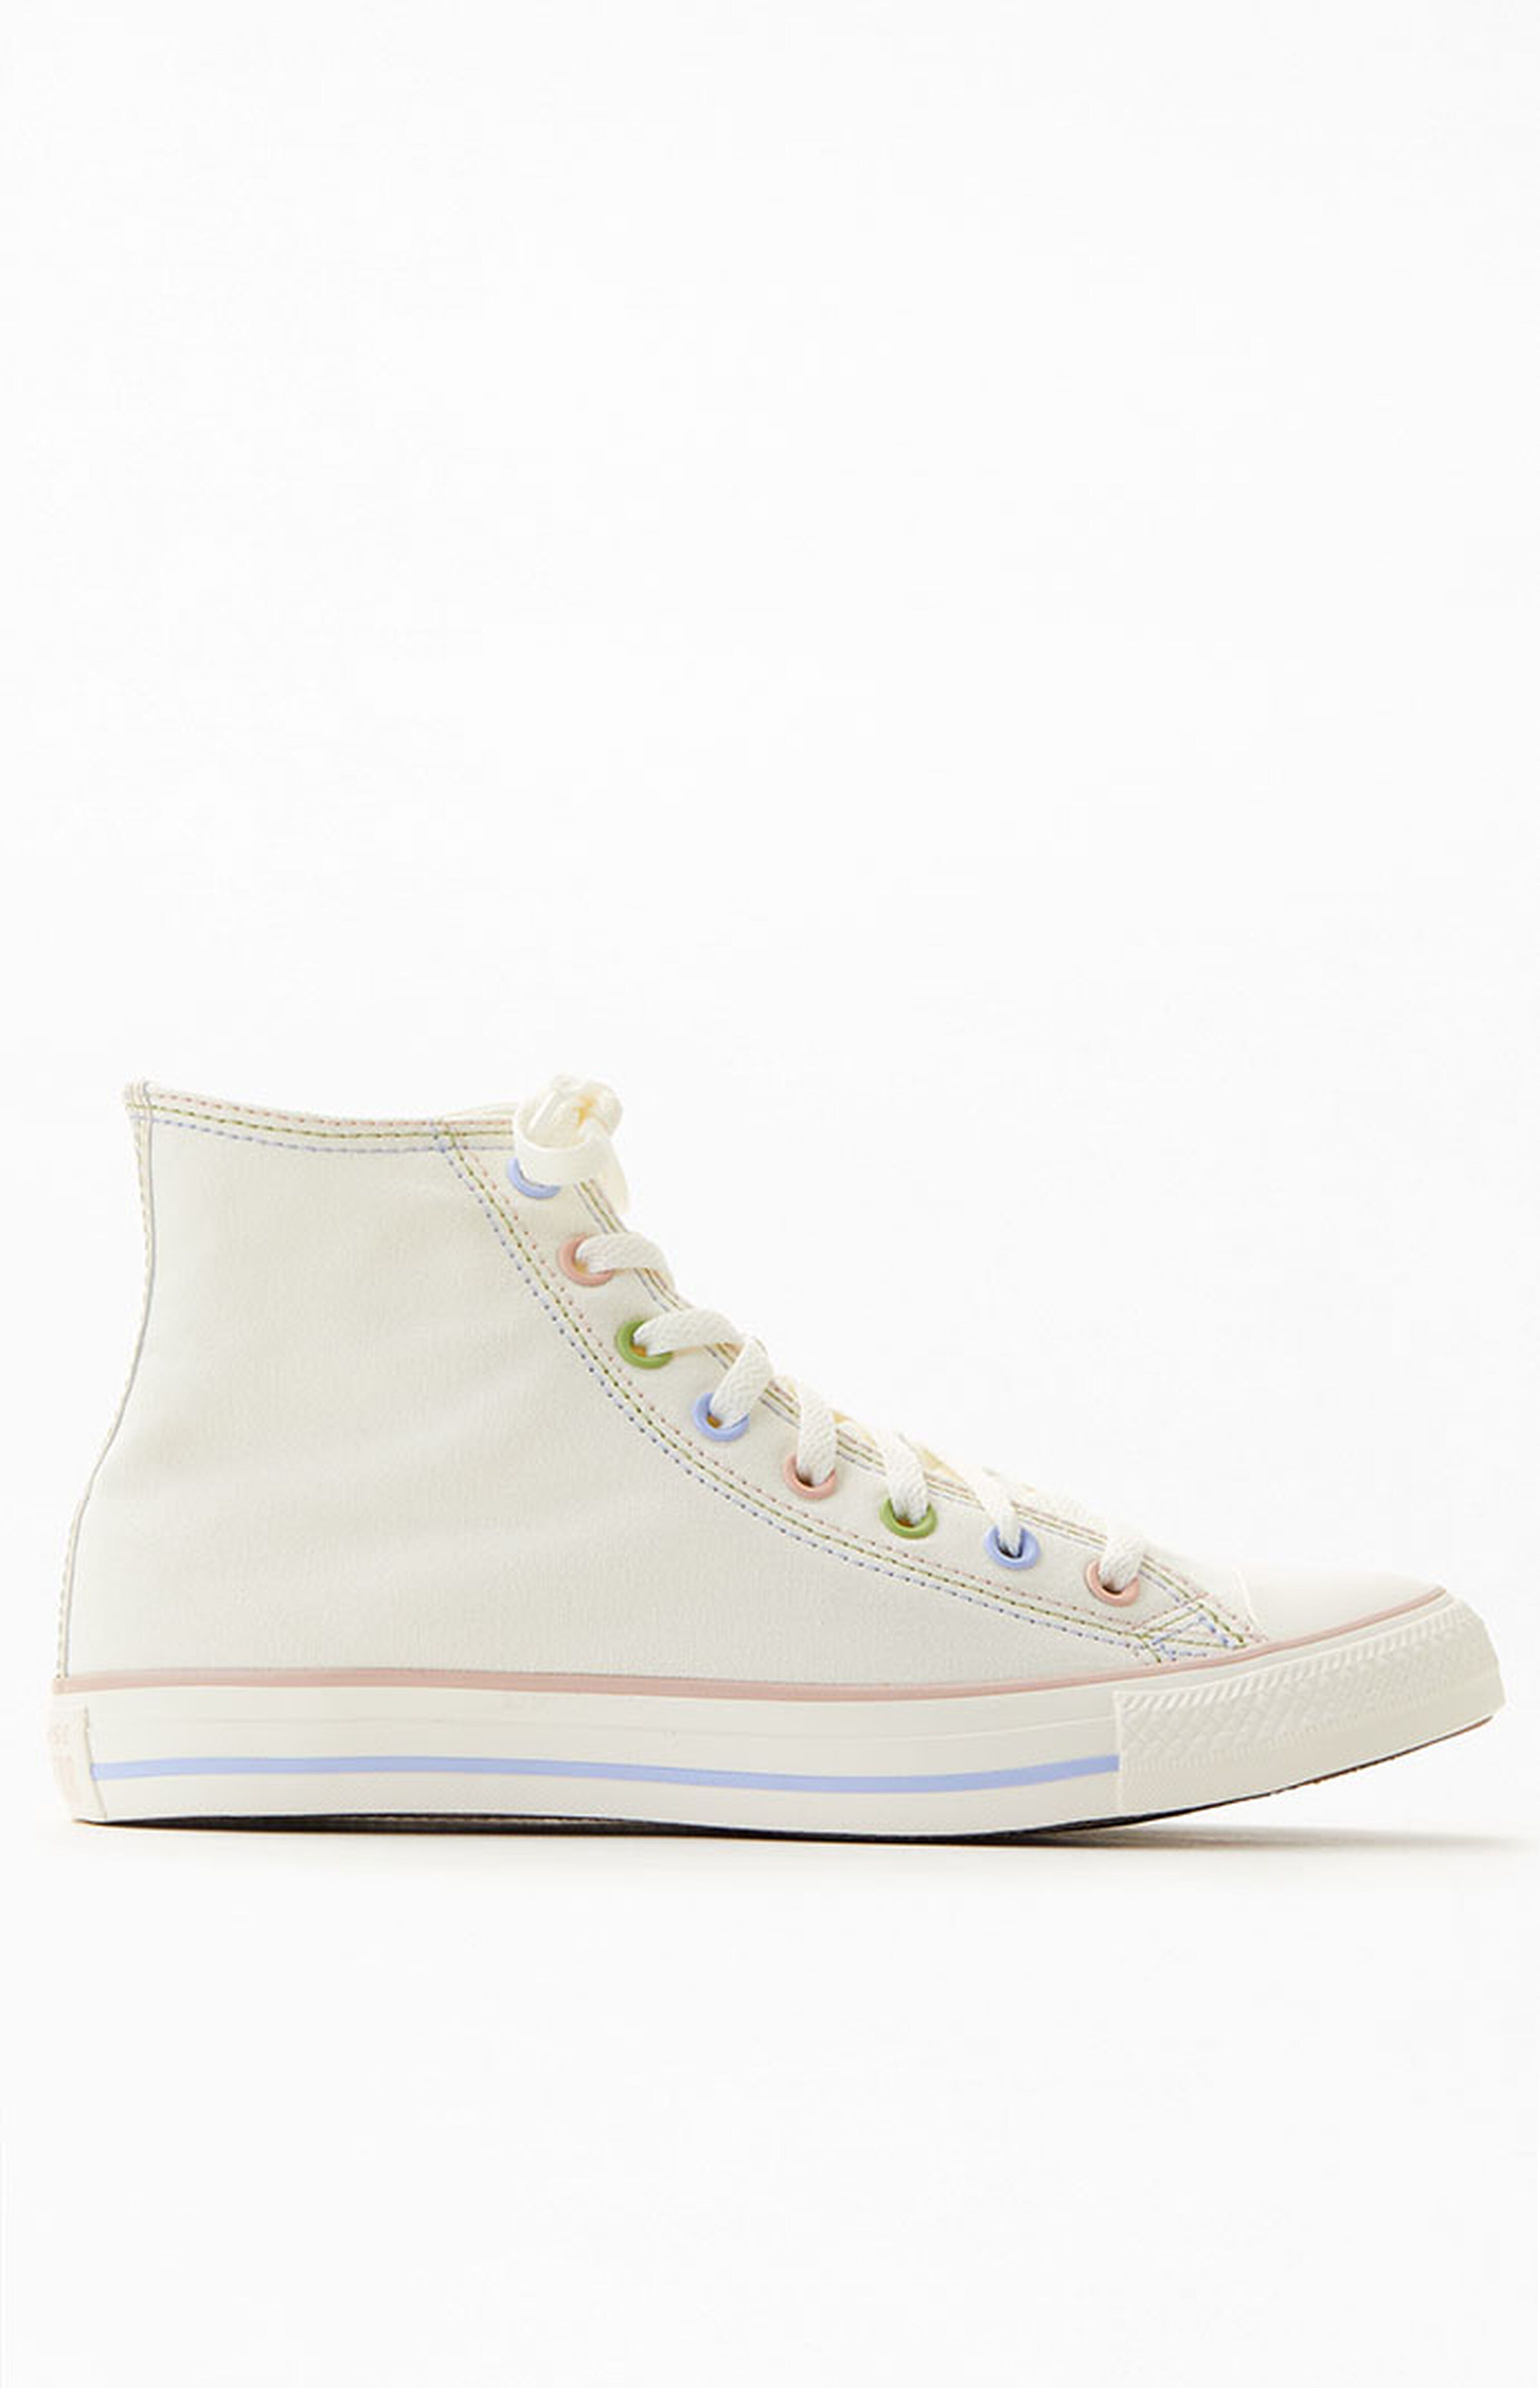 Converse Mixed Chuck Taylor All Star High Top Sneakers | PacSun